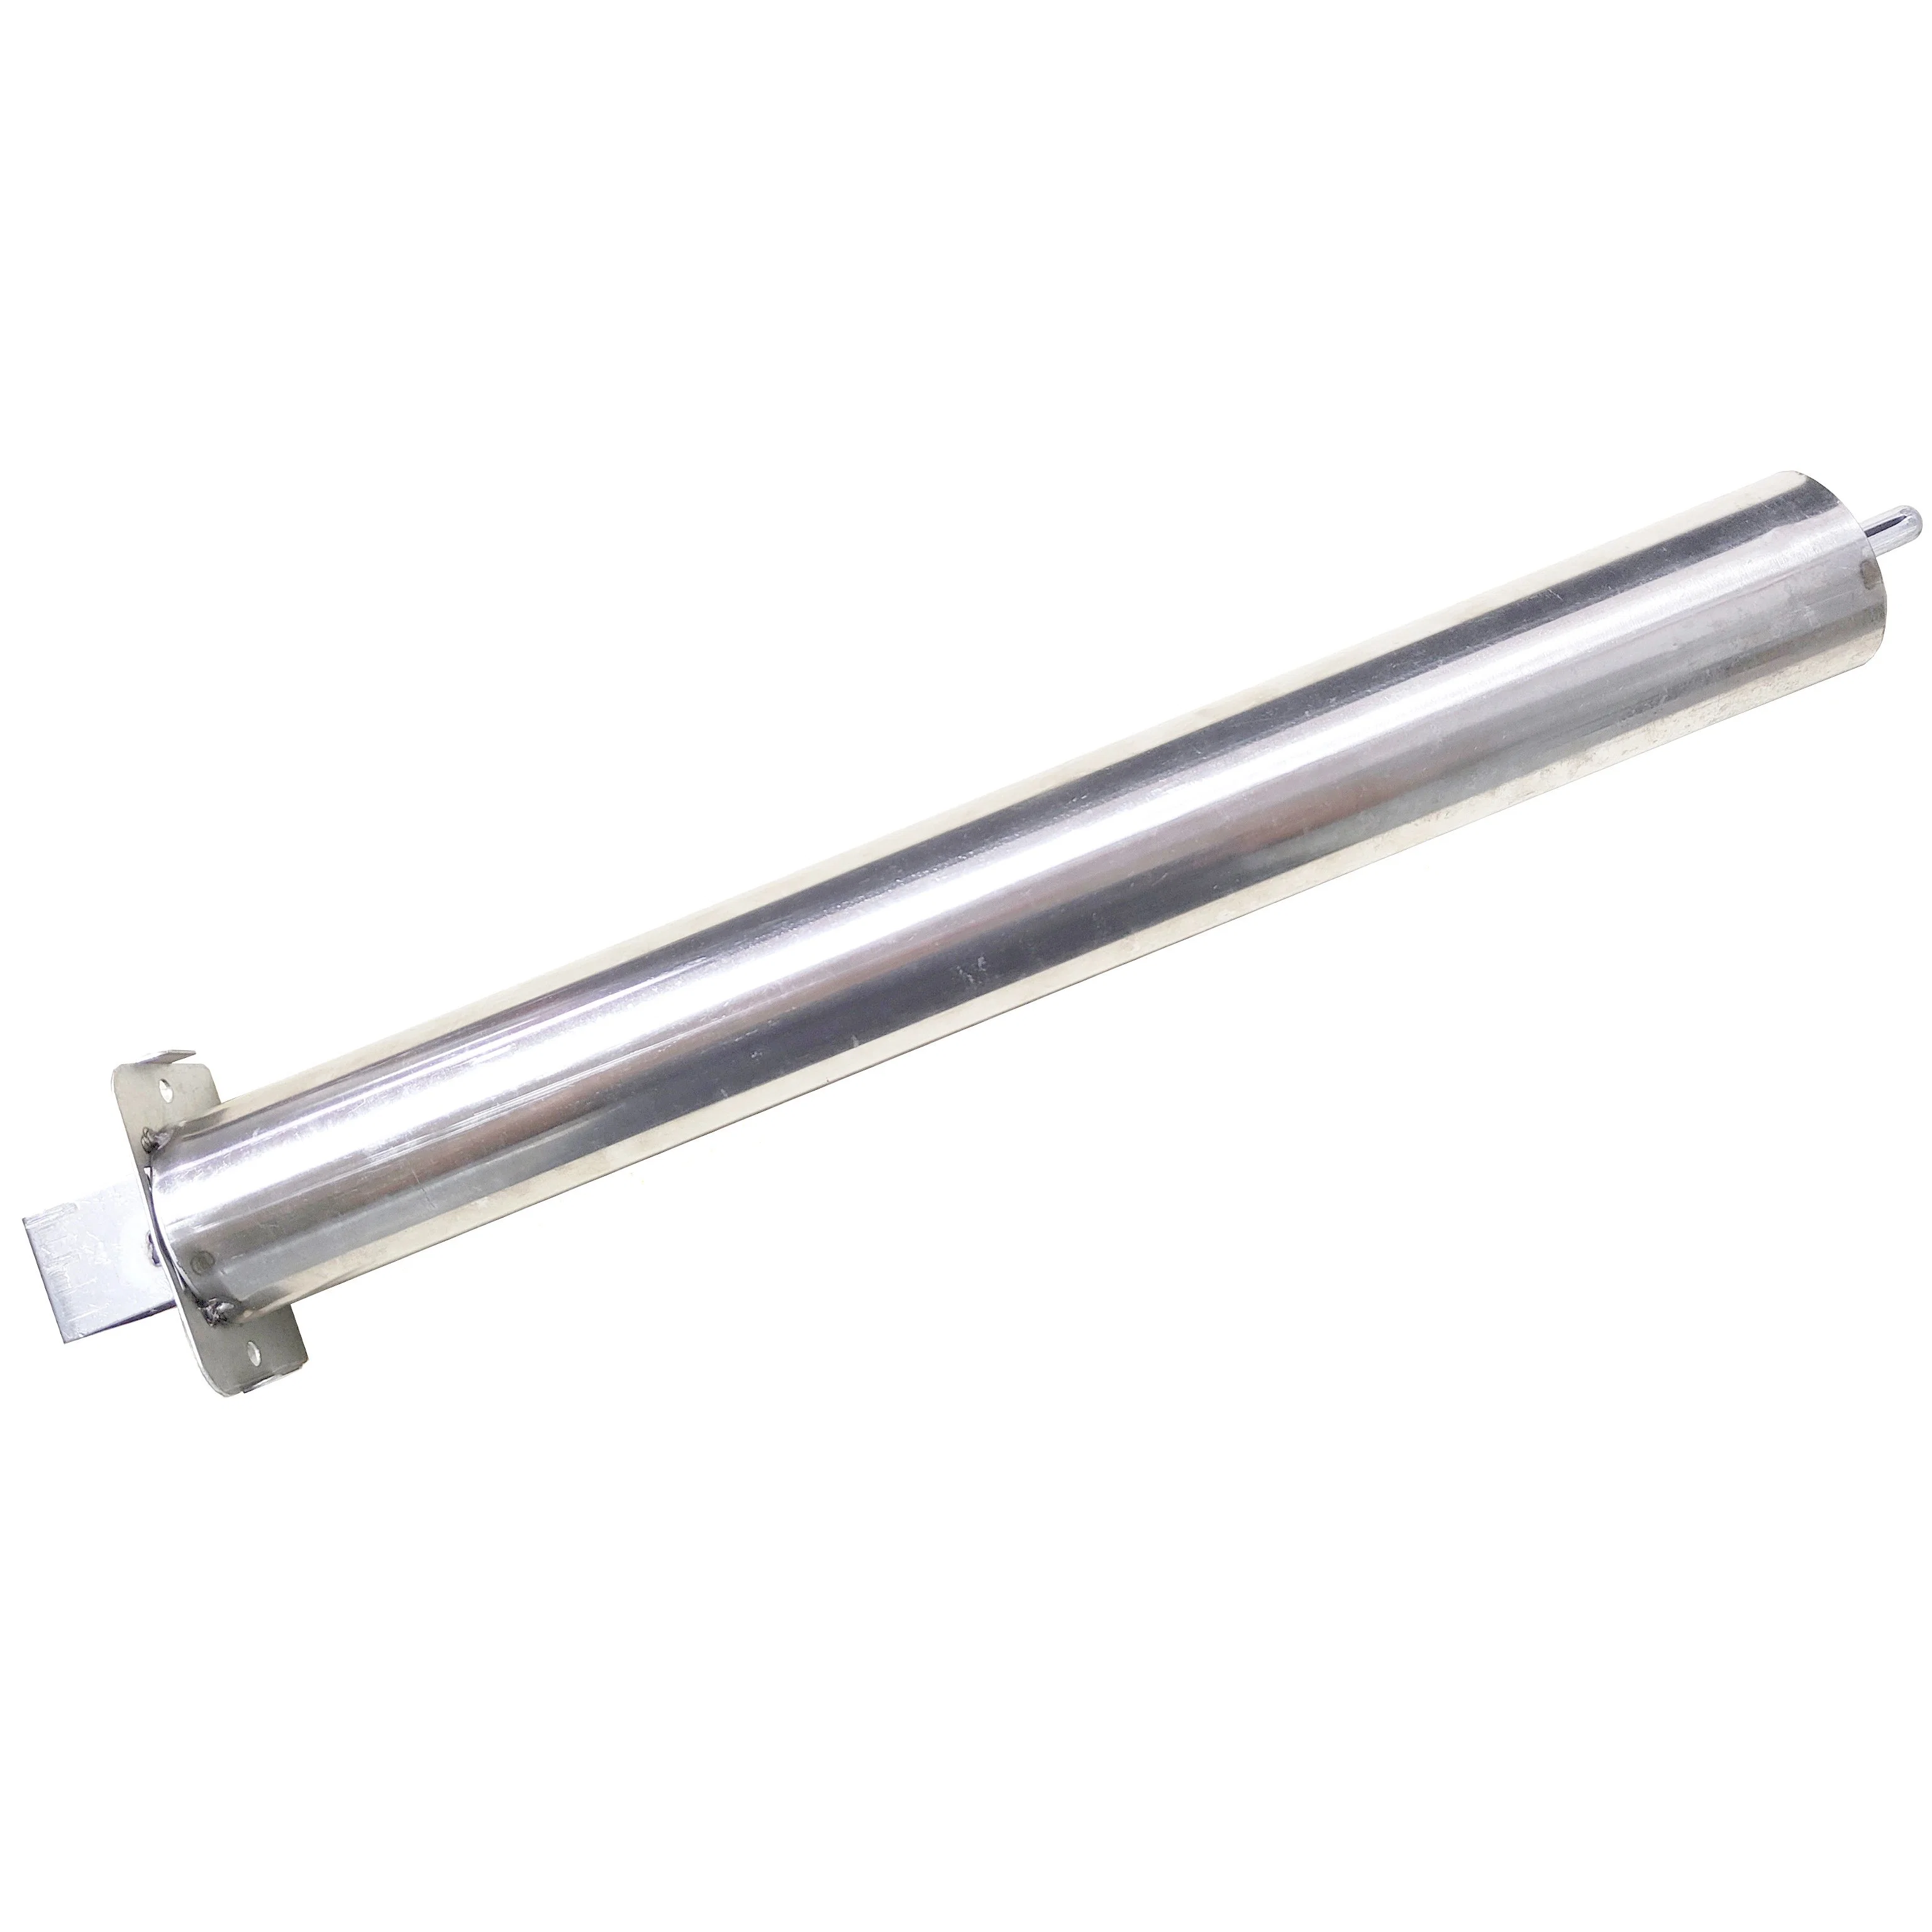 Stainless Steel Gas Tube Burner for Gas Grills and Gas Heater